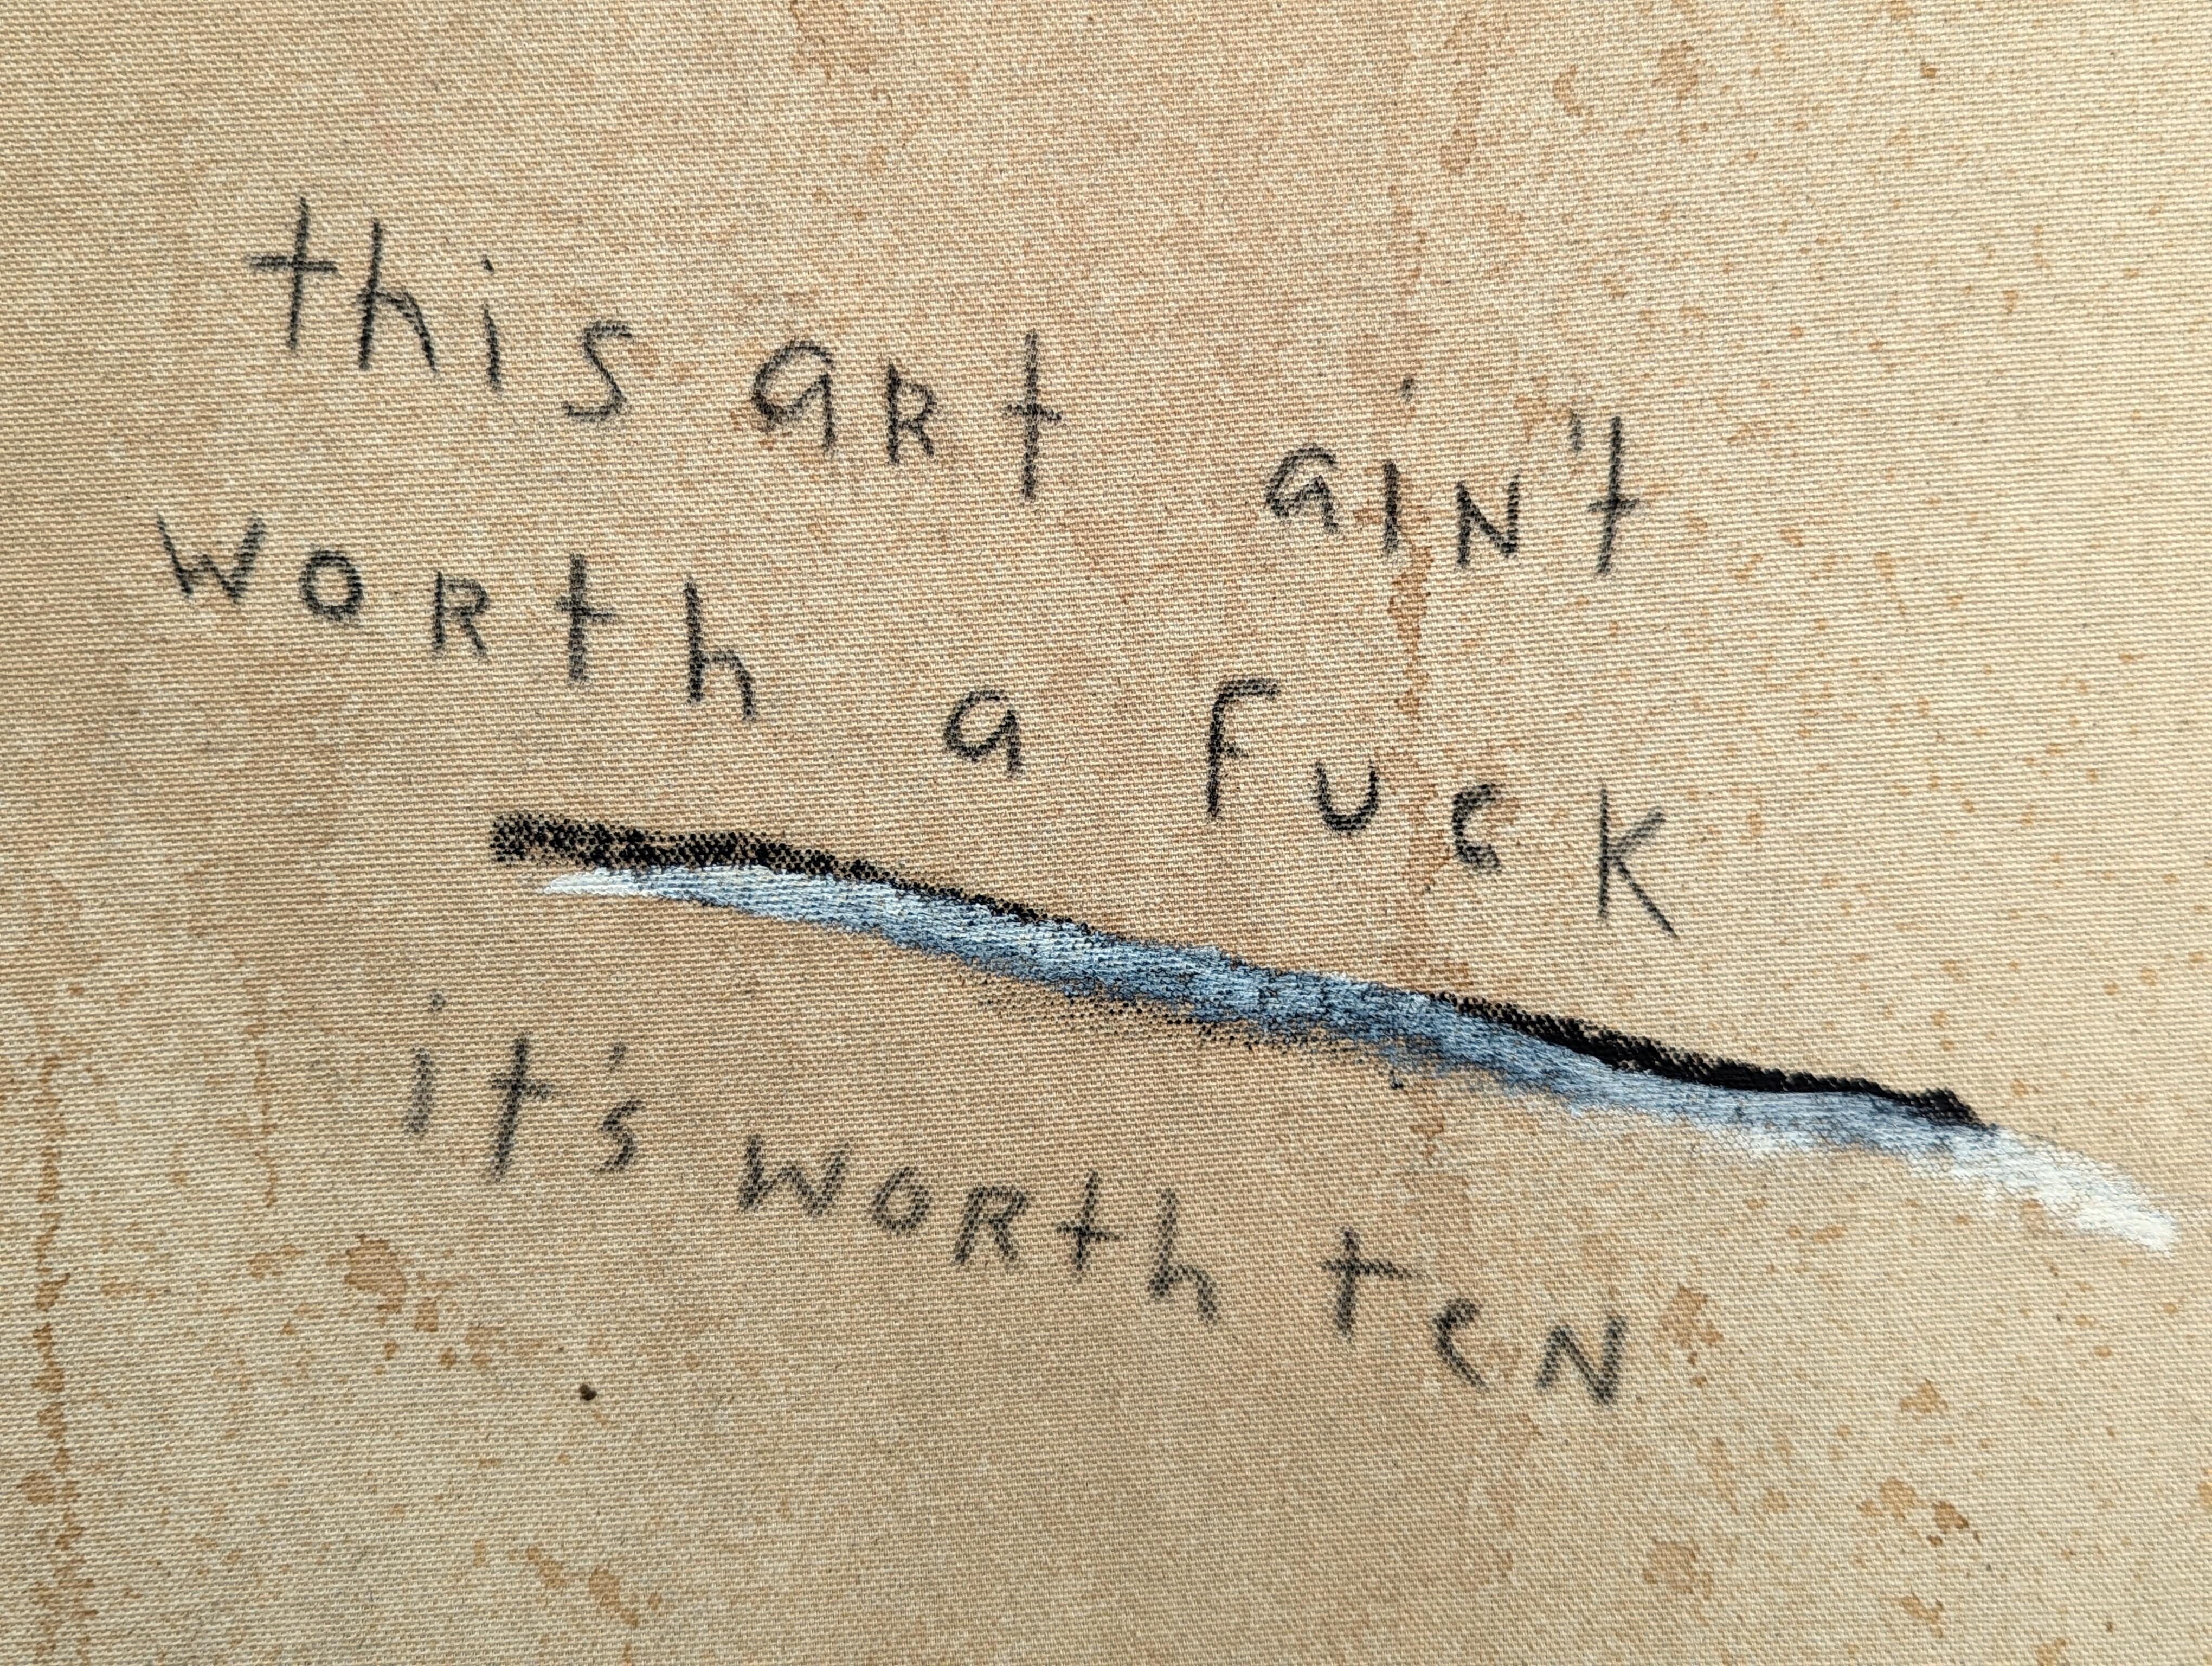 It's Worth Ten Abstrakte Contemporary Black & Tan Text Painting im Angebot 1